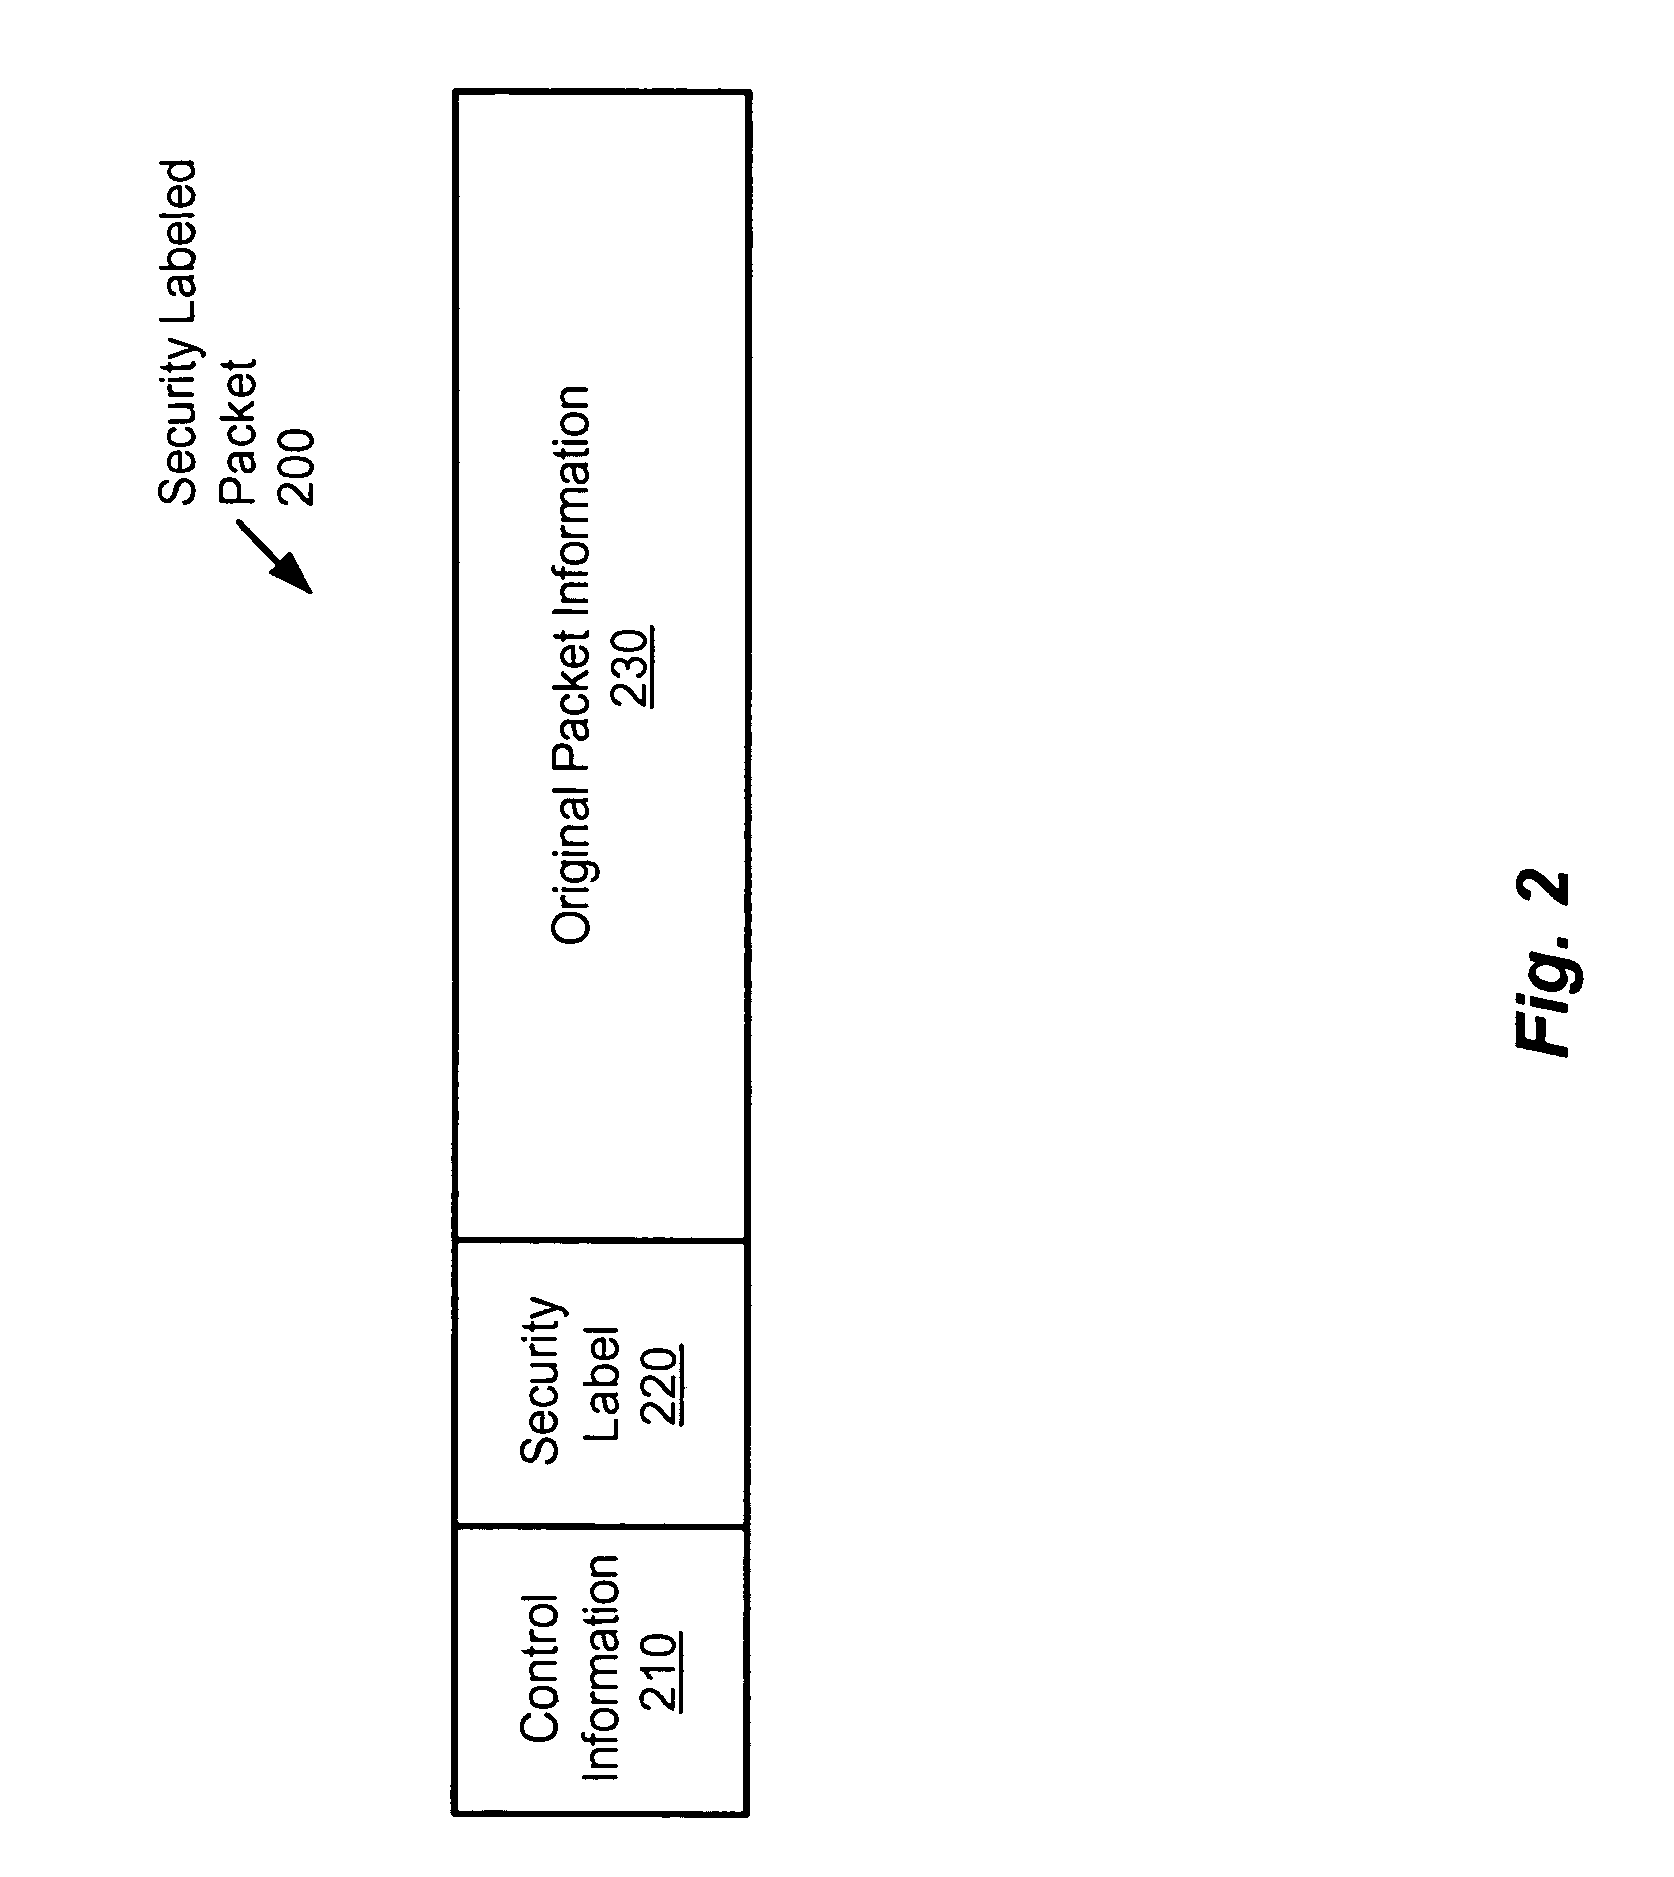 Method and apparatus for providing network security using security labeling